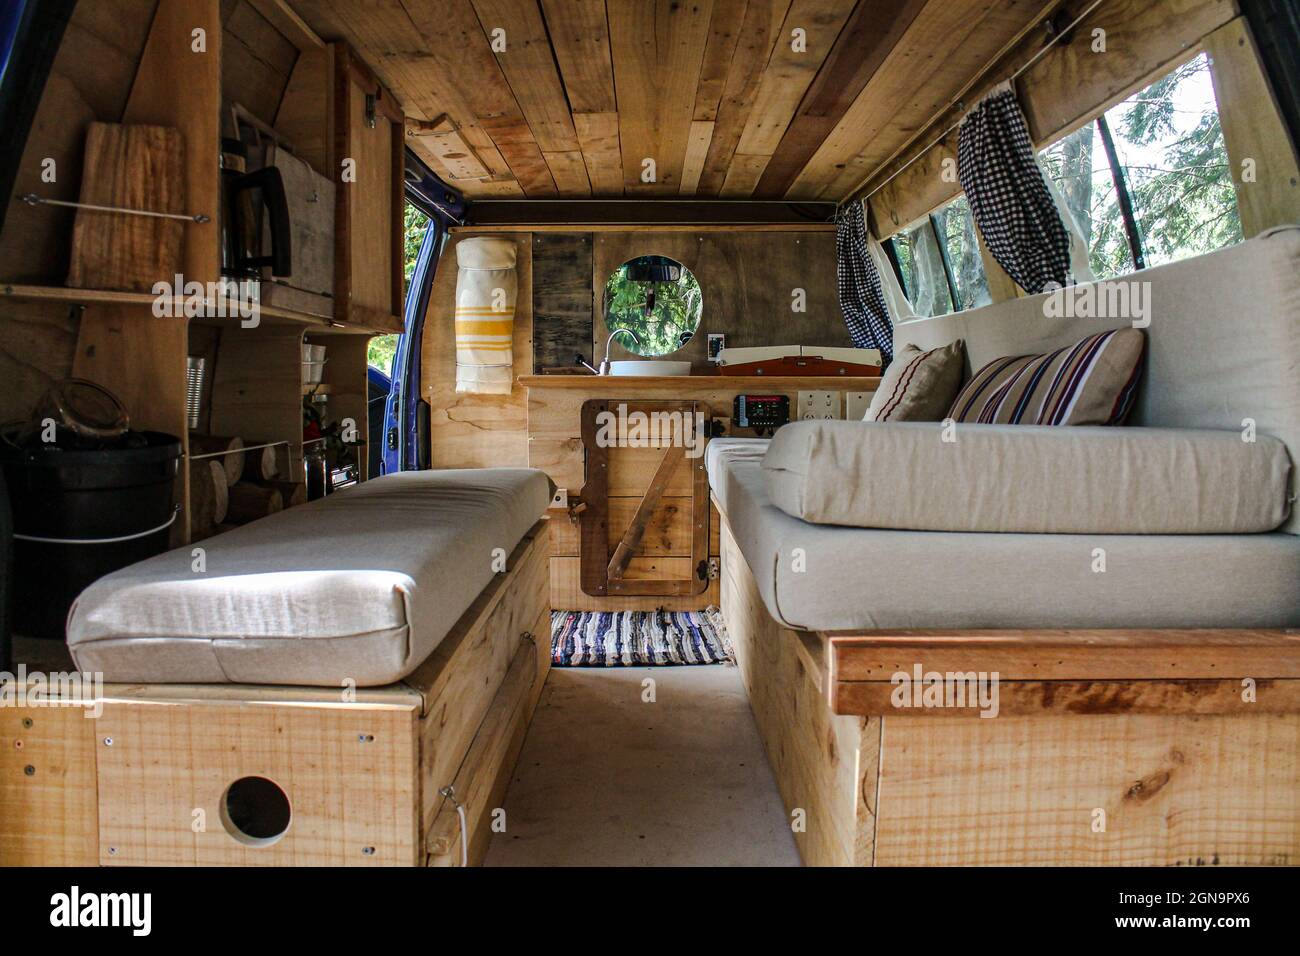 Beautiful view of couch inside a vintage wooden van Stock Photo - Alamy